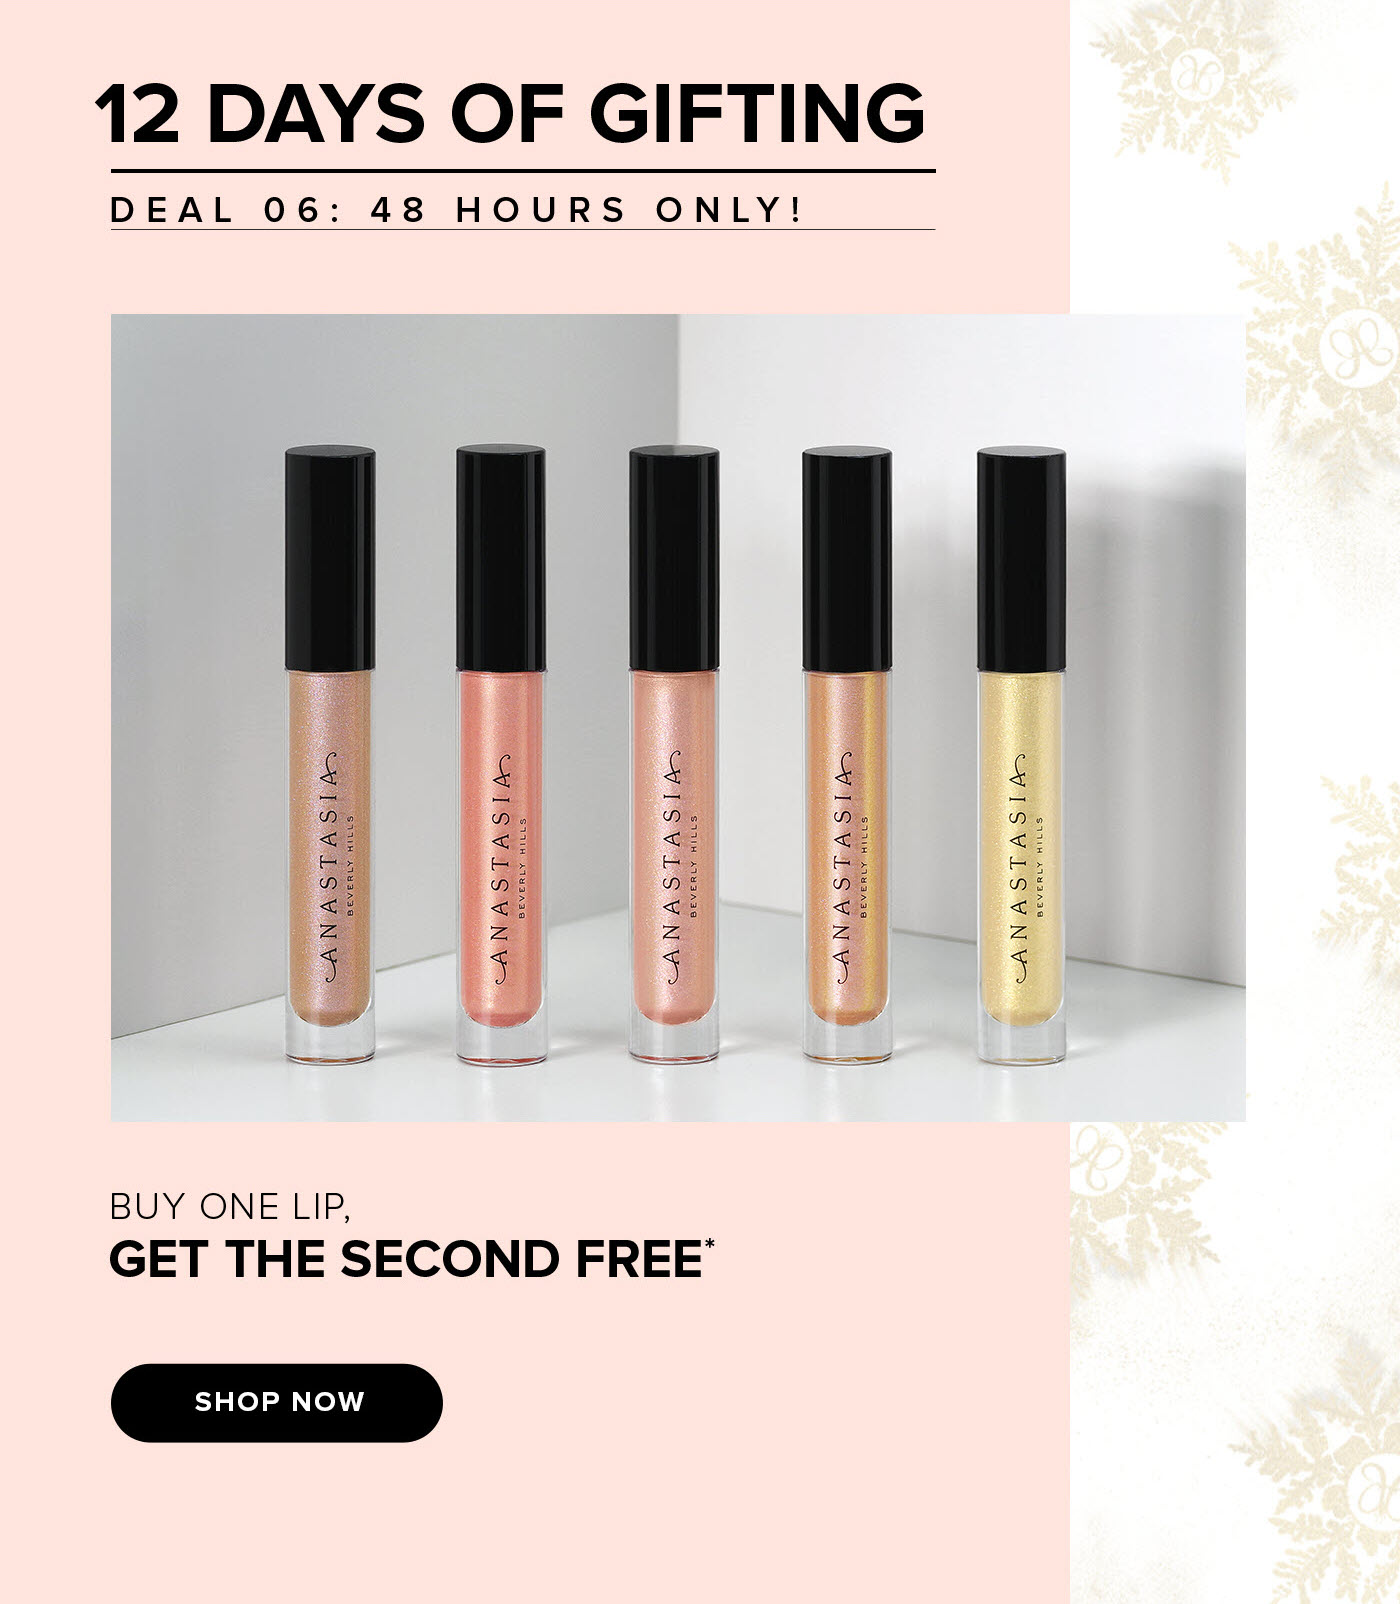 12 Days of Gifting - Deal 6: Buy One Lip, Get the Second Free